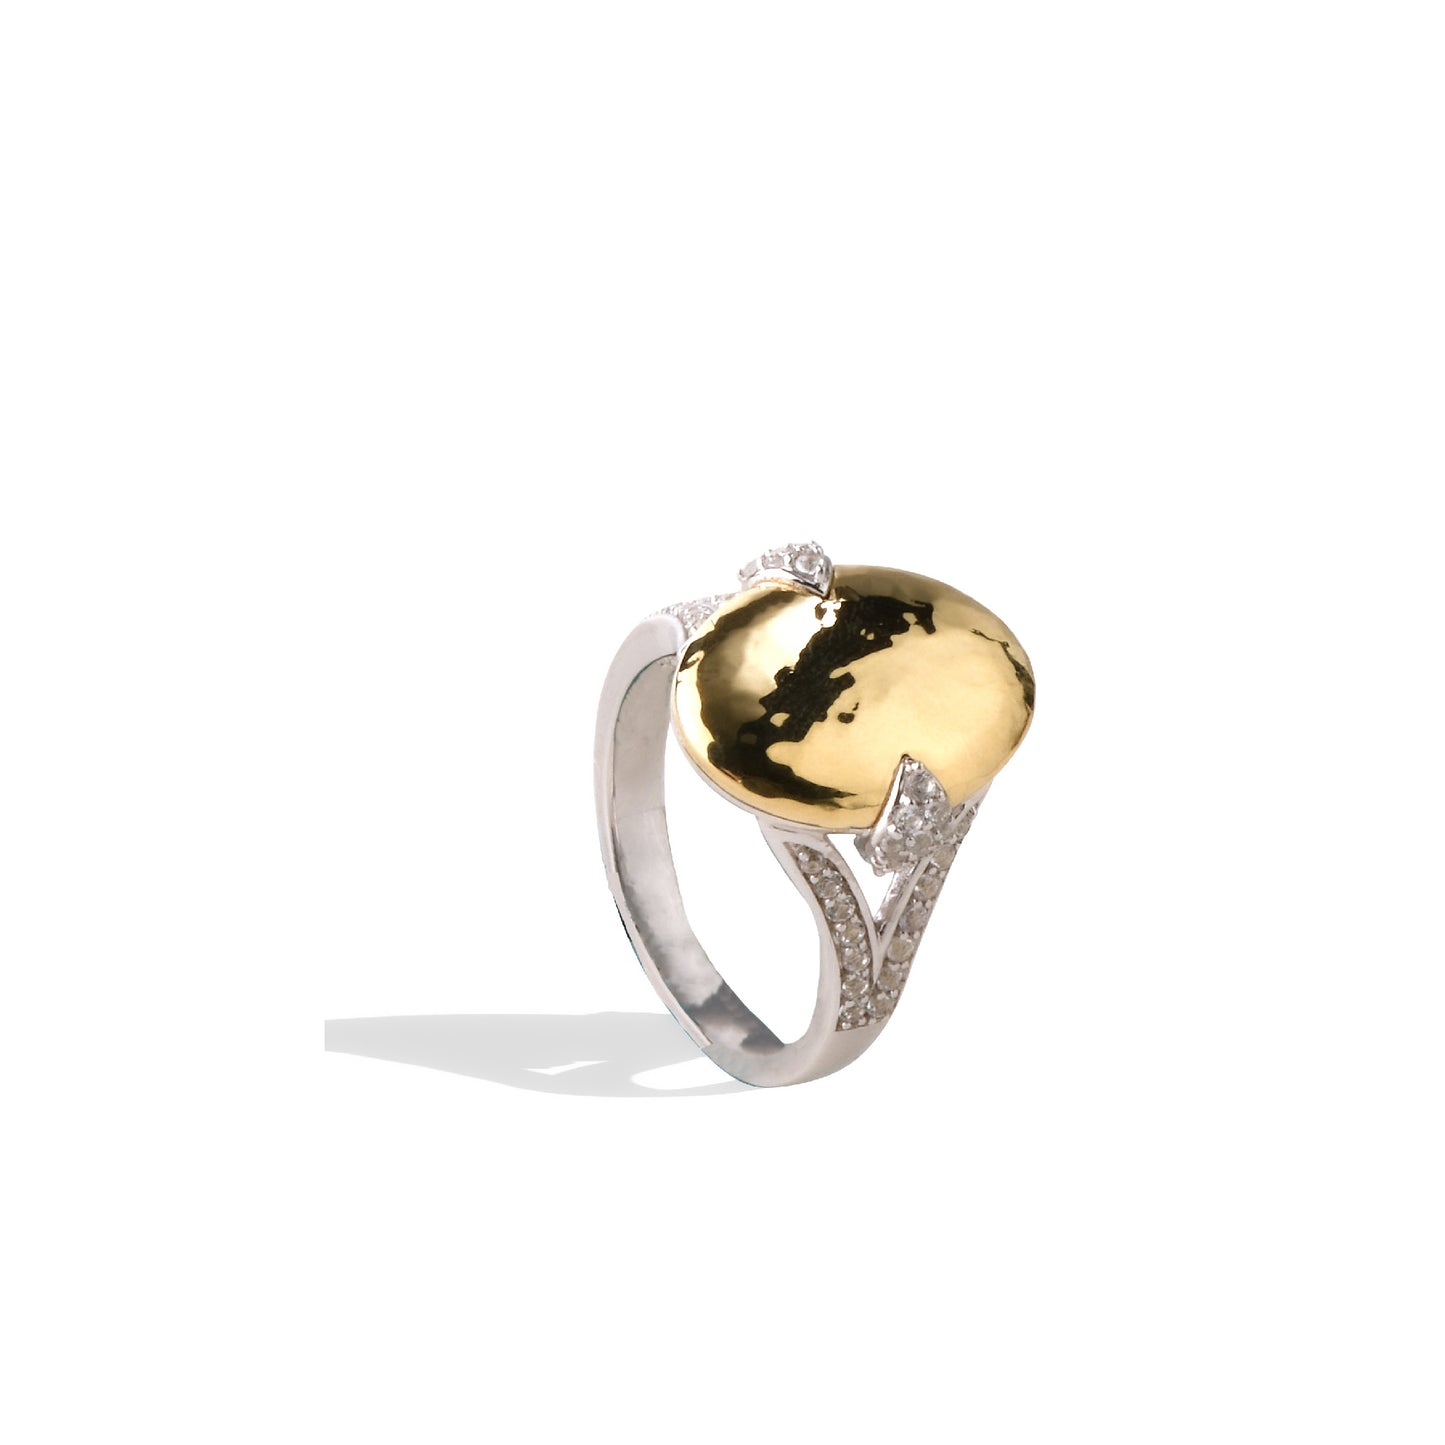 White Sapphire Ring | Sterling Silver White Sapphire Ring with Yellow Gold Head